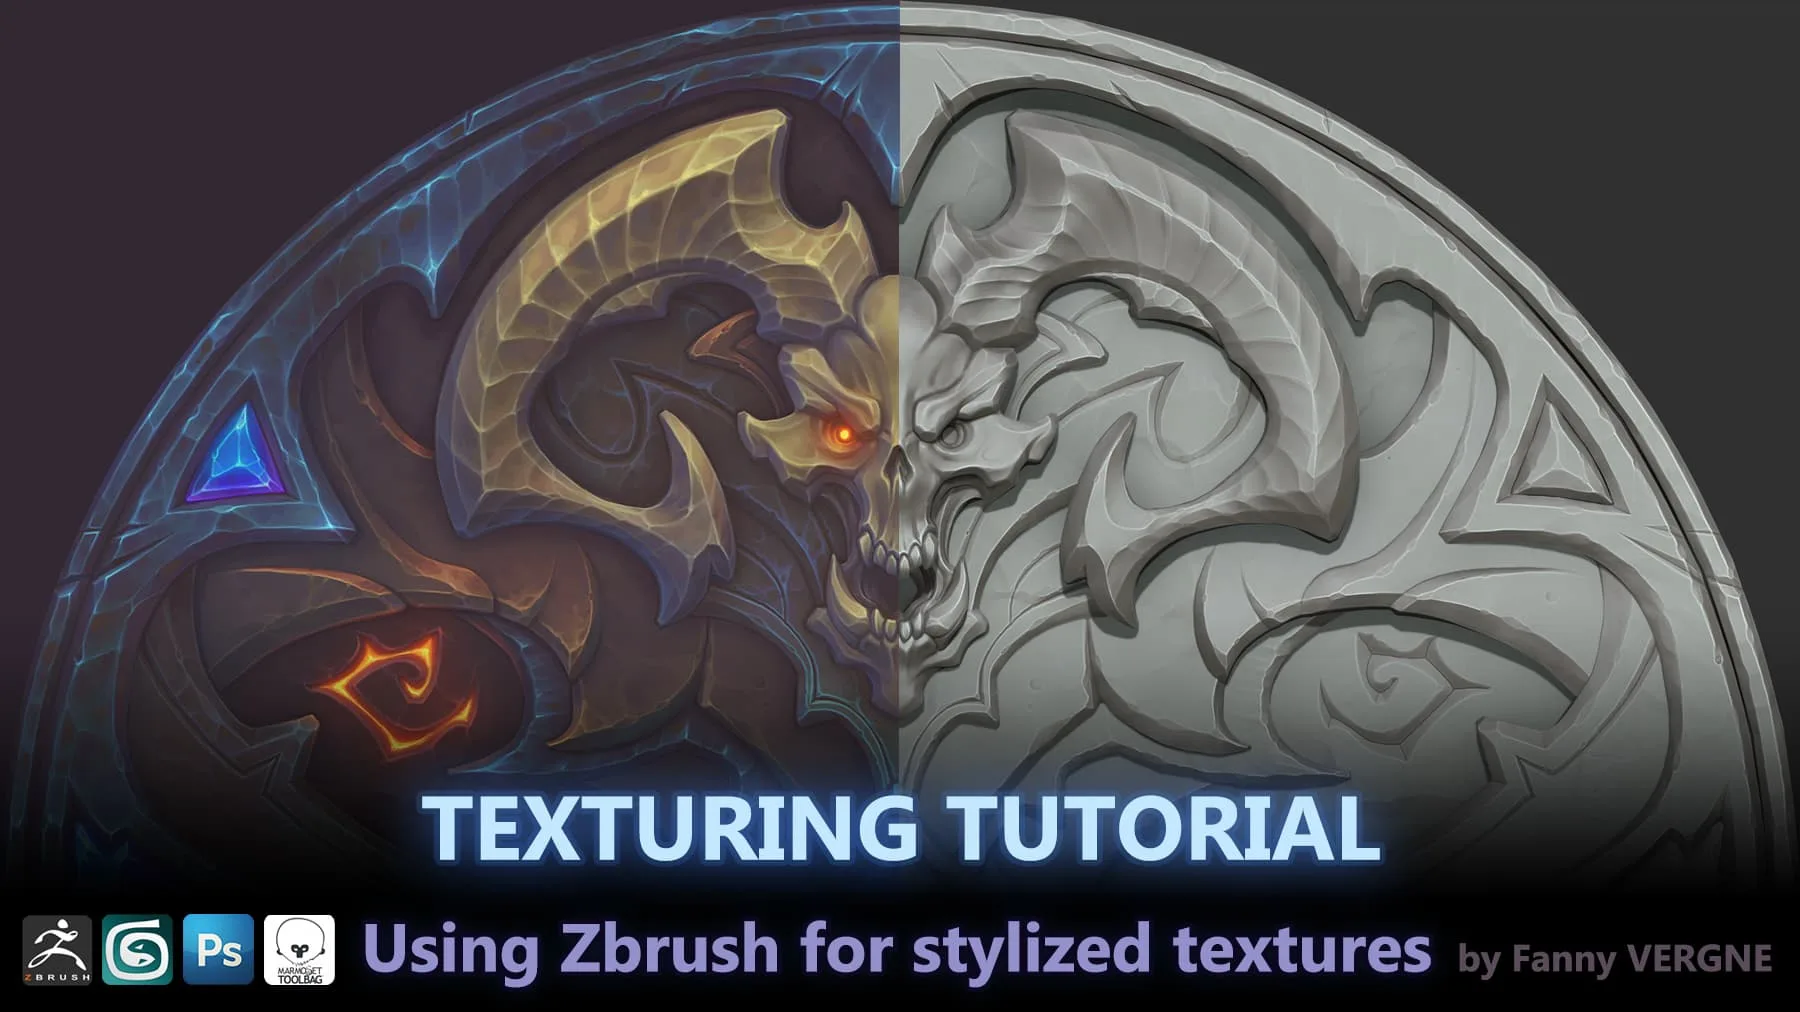 Texturing Tutorial - Using Zbrush for Stylized Textures